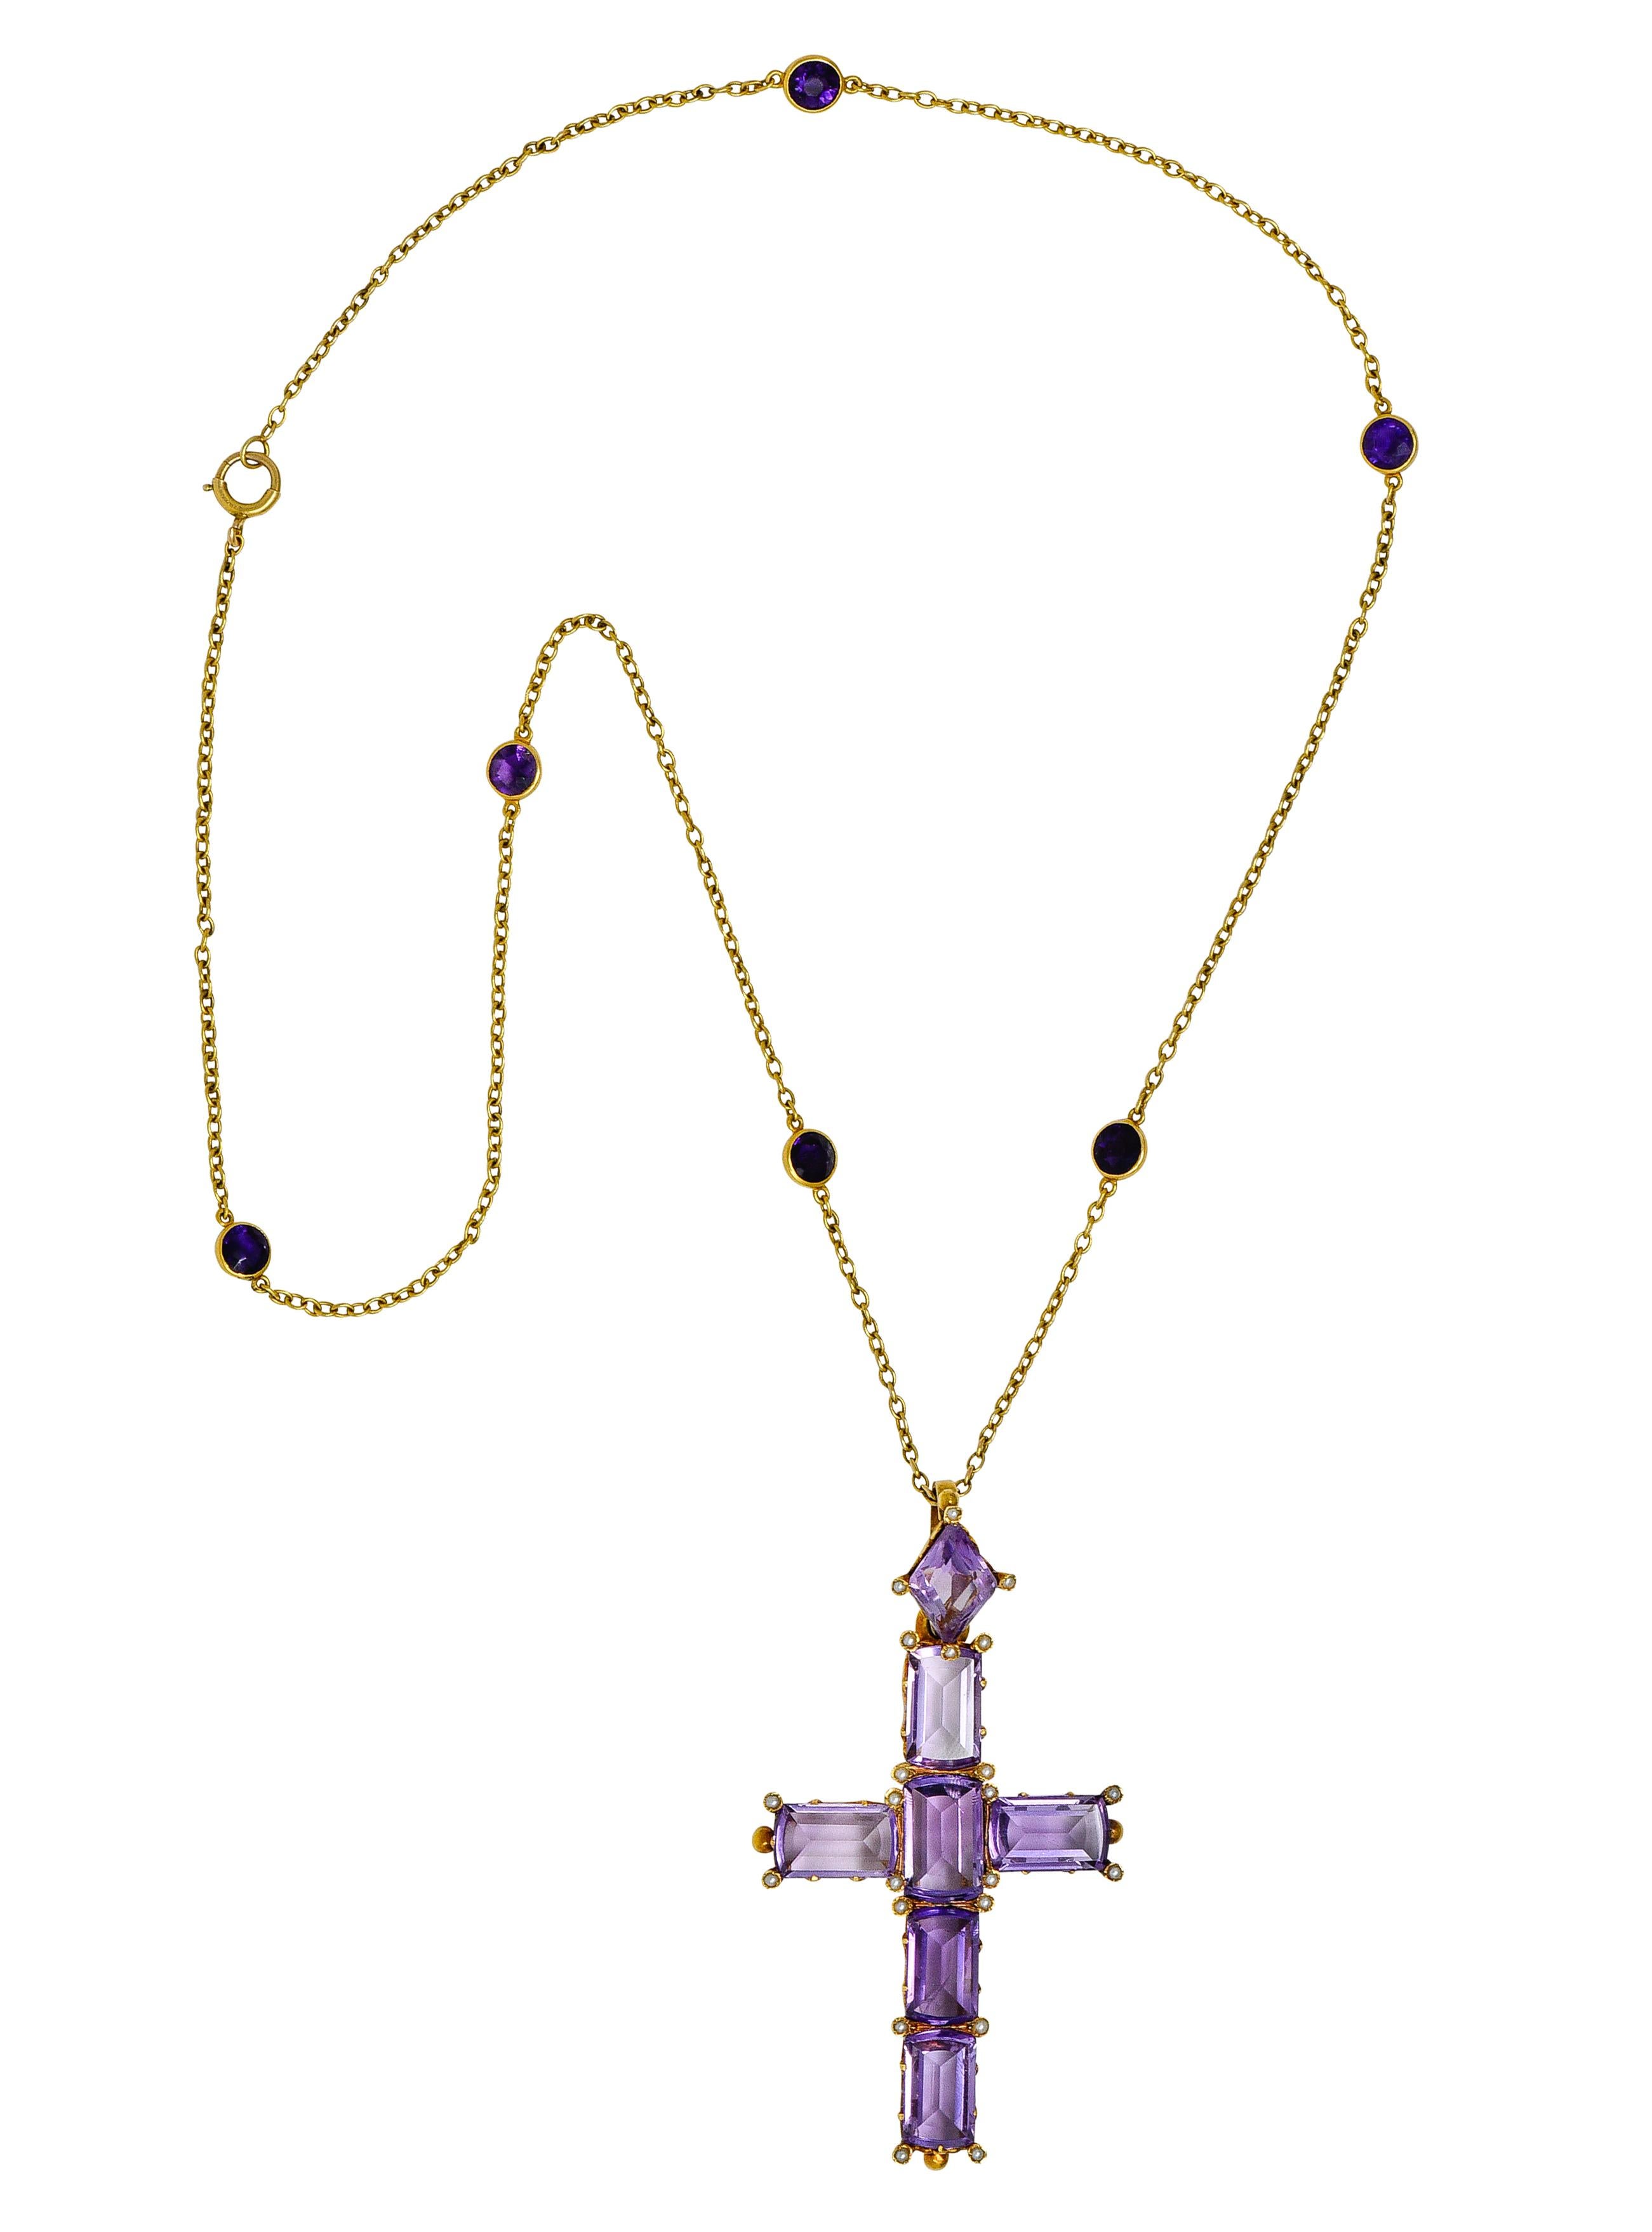 Featuring a cross pendant comprised of mixed emerald cut amethysts with a diamond shaped amethyst surmount. Transparent pinkish purple with natural inclusions with light/medium saturation. Set in mountings with stylized scrolling fleur-des-lis